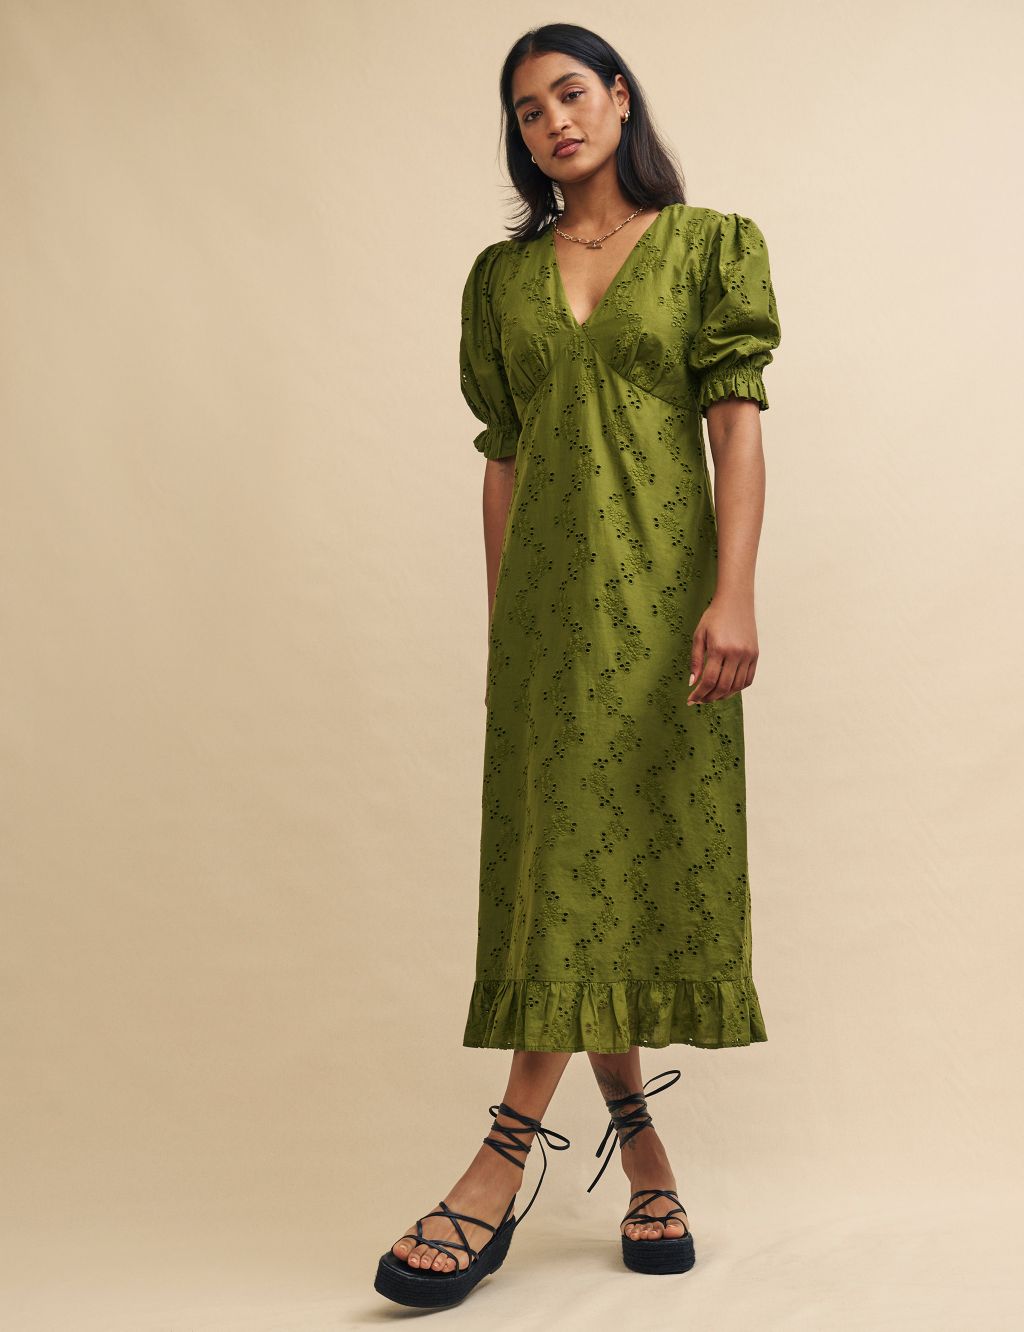 Pure Cotton Embroidered V-Neck Midaxi Dress